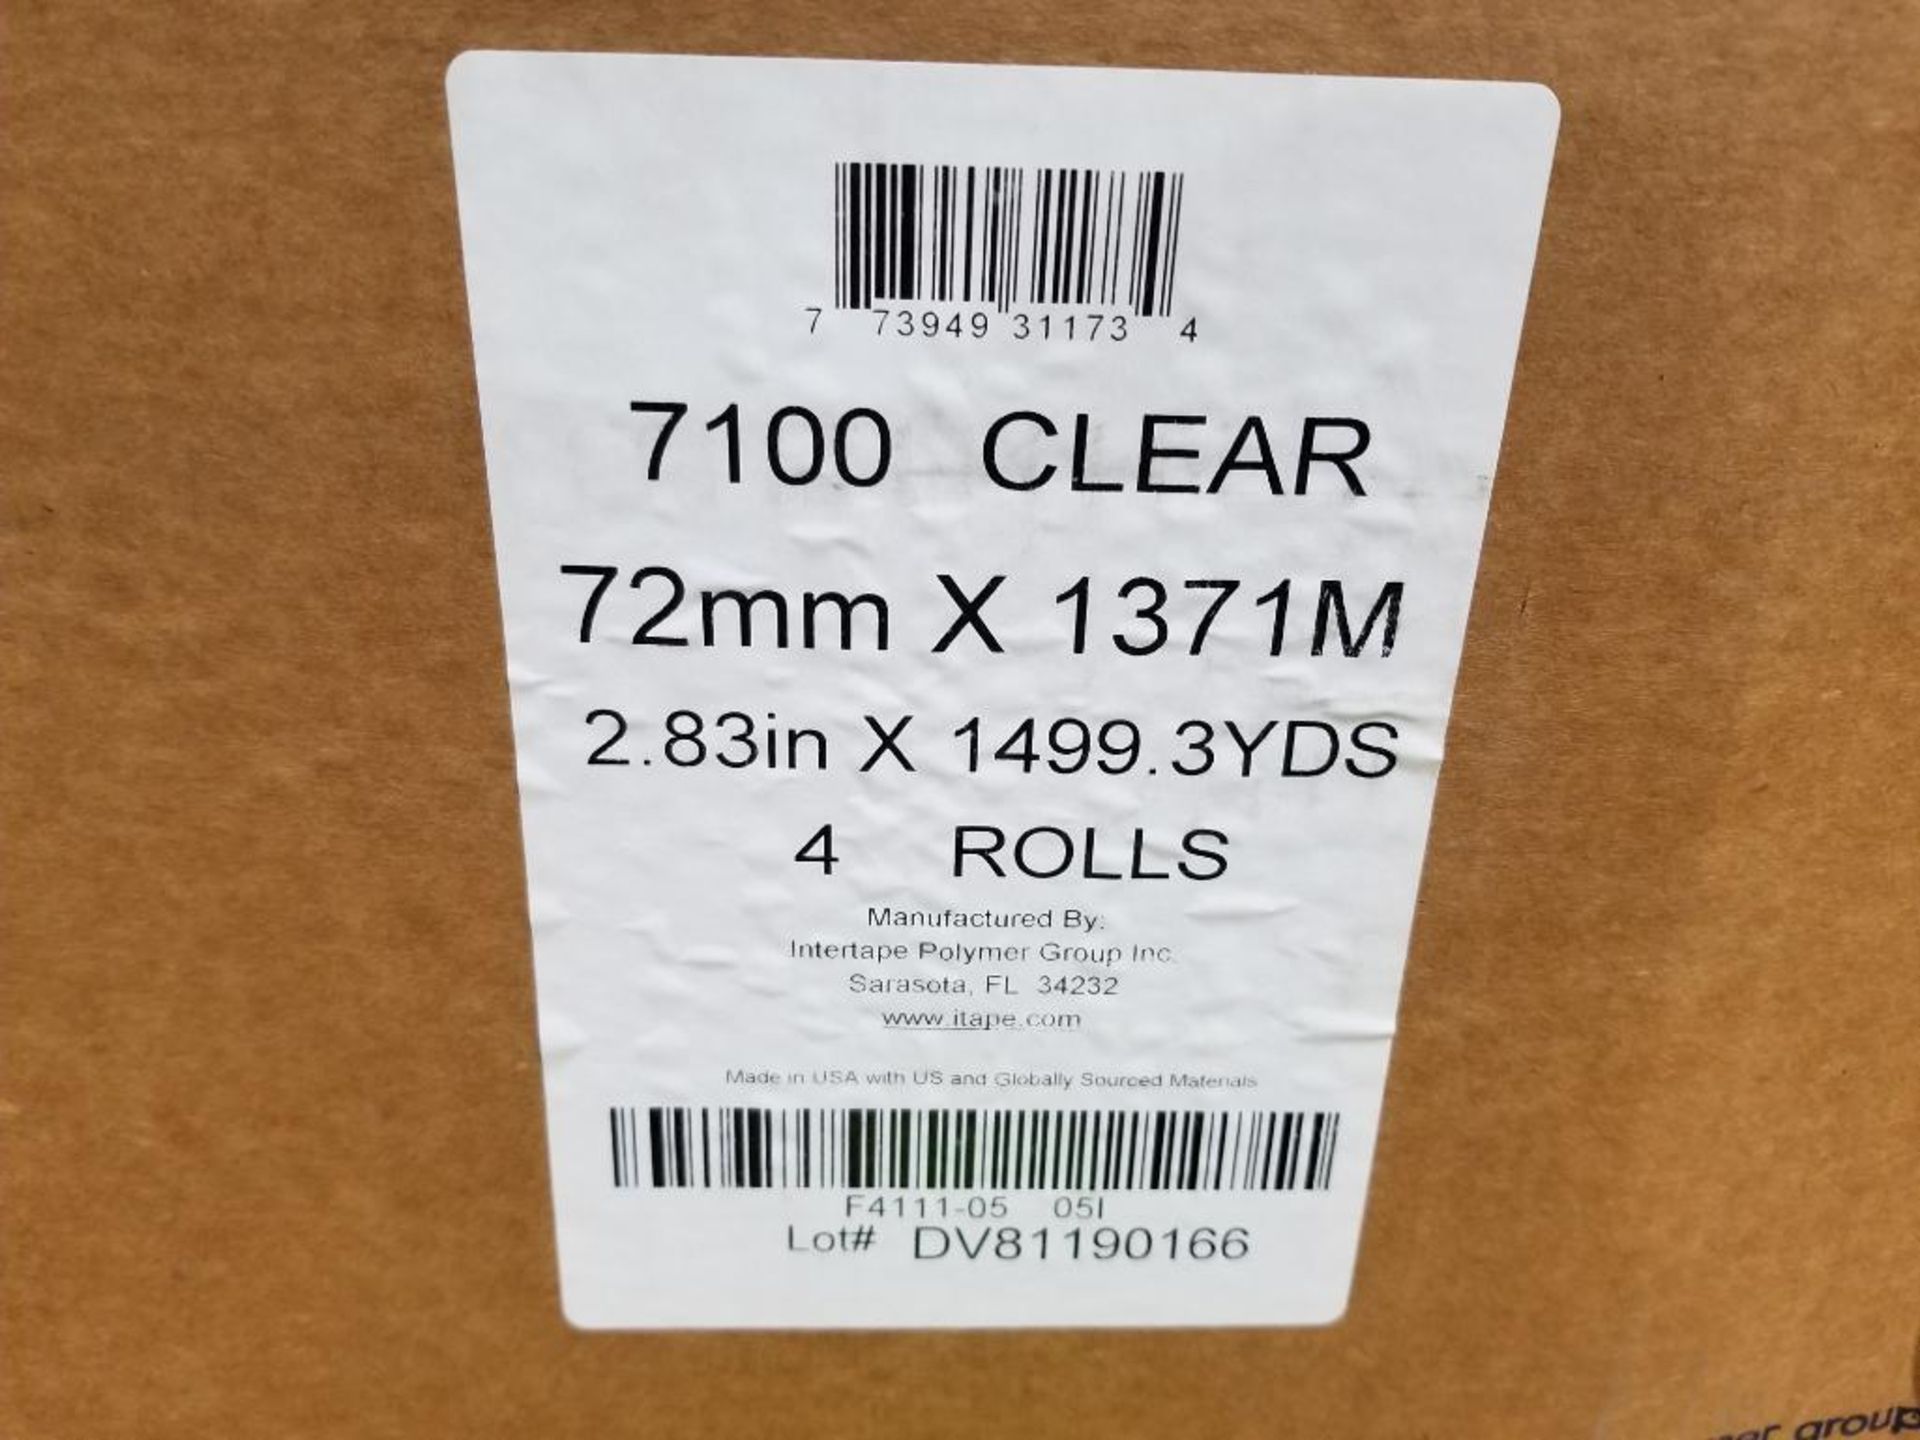 Qty 20 rolls - Intertape bulk packing tape for auto case sealers. Model 7100 clear. (5 boxes of 4) - Image 2 of 3